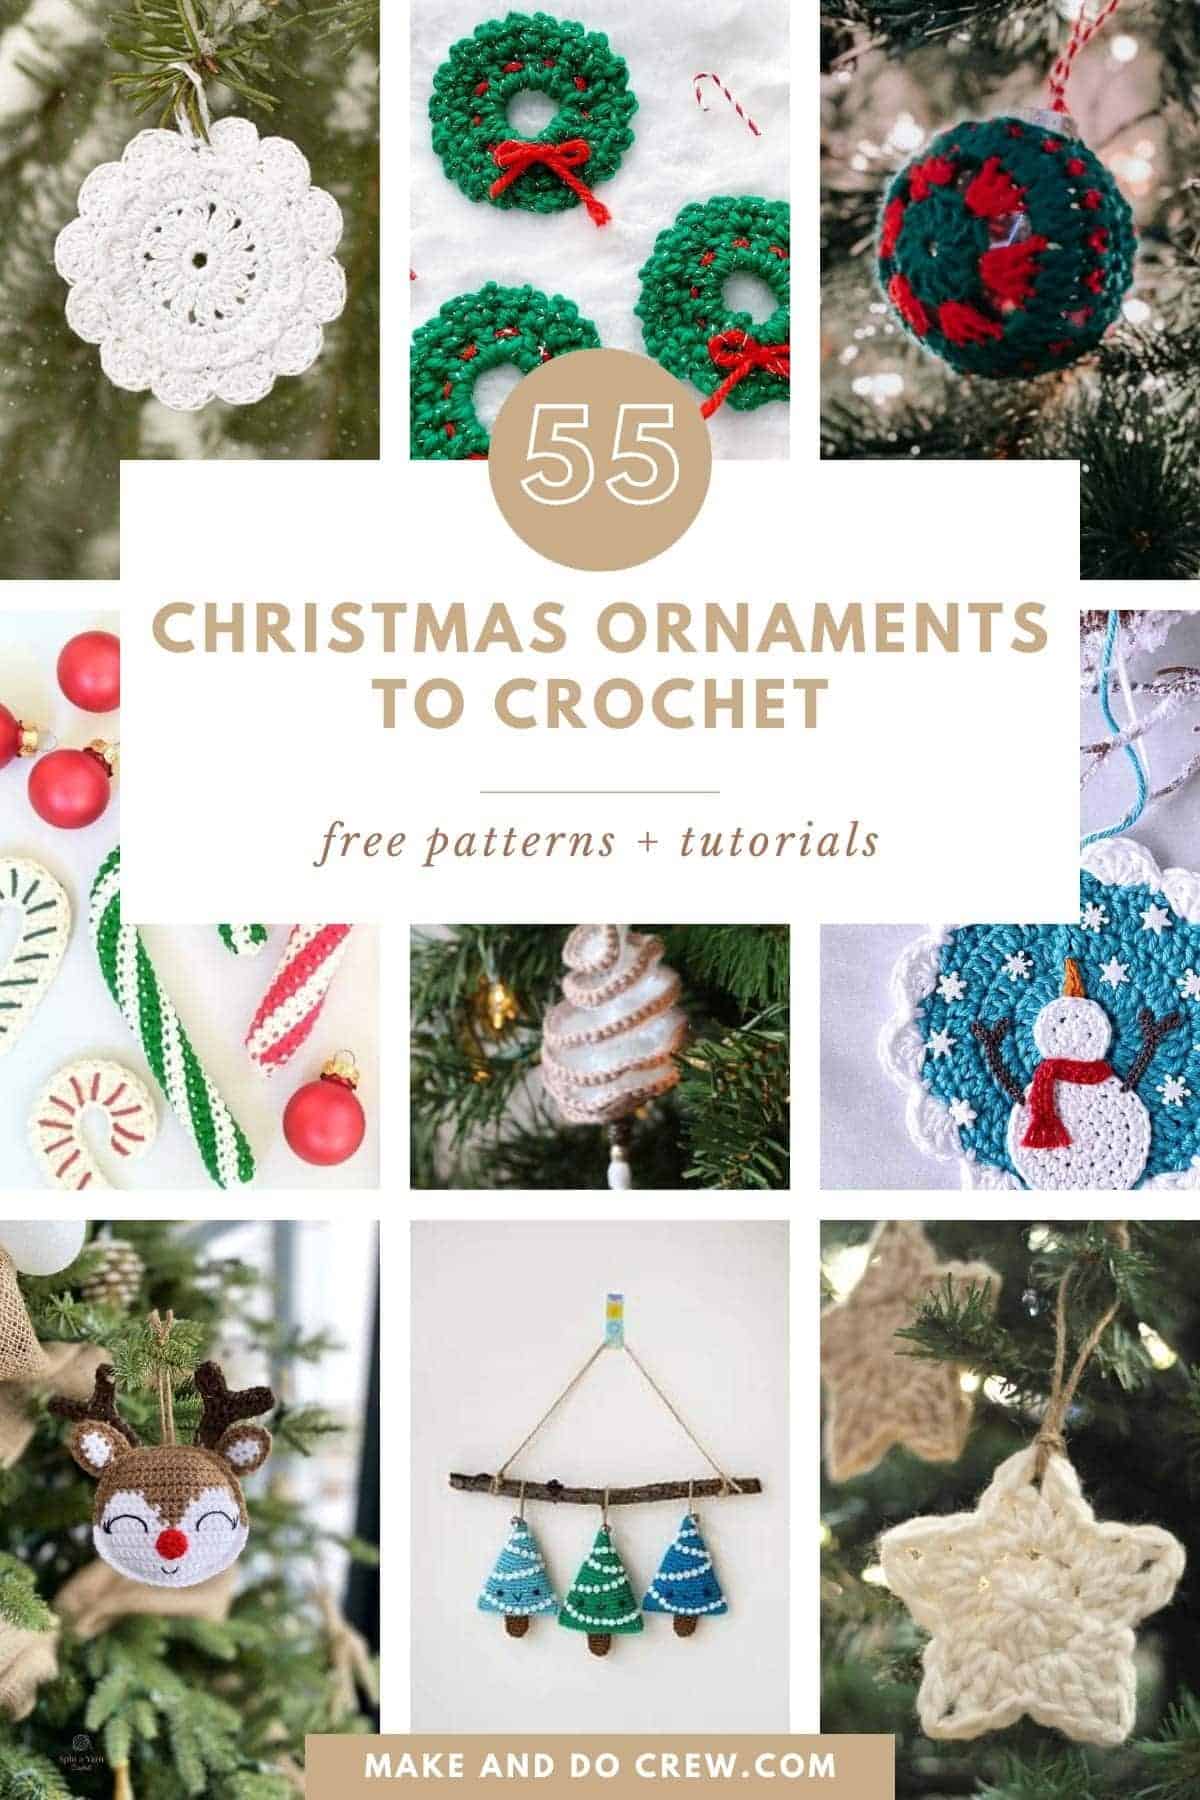 Collection of Christmas ornaments to crochet.